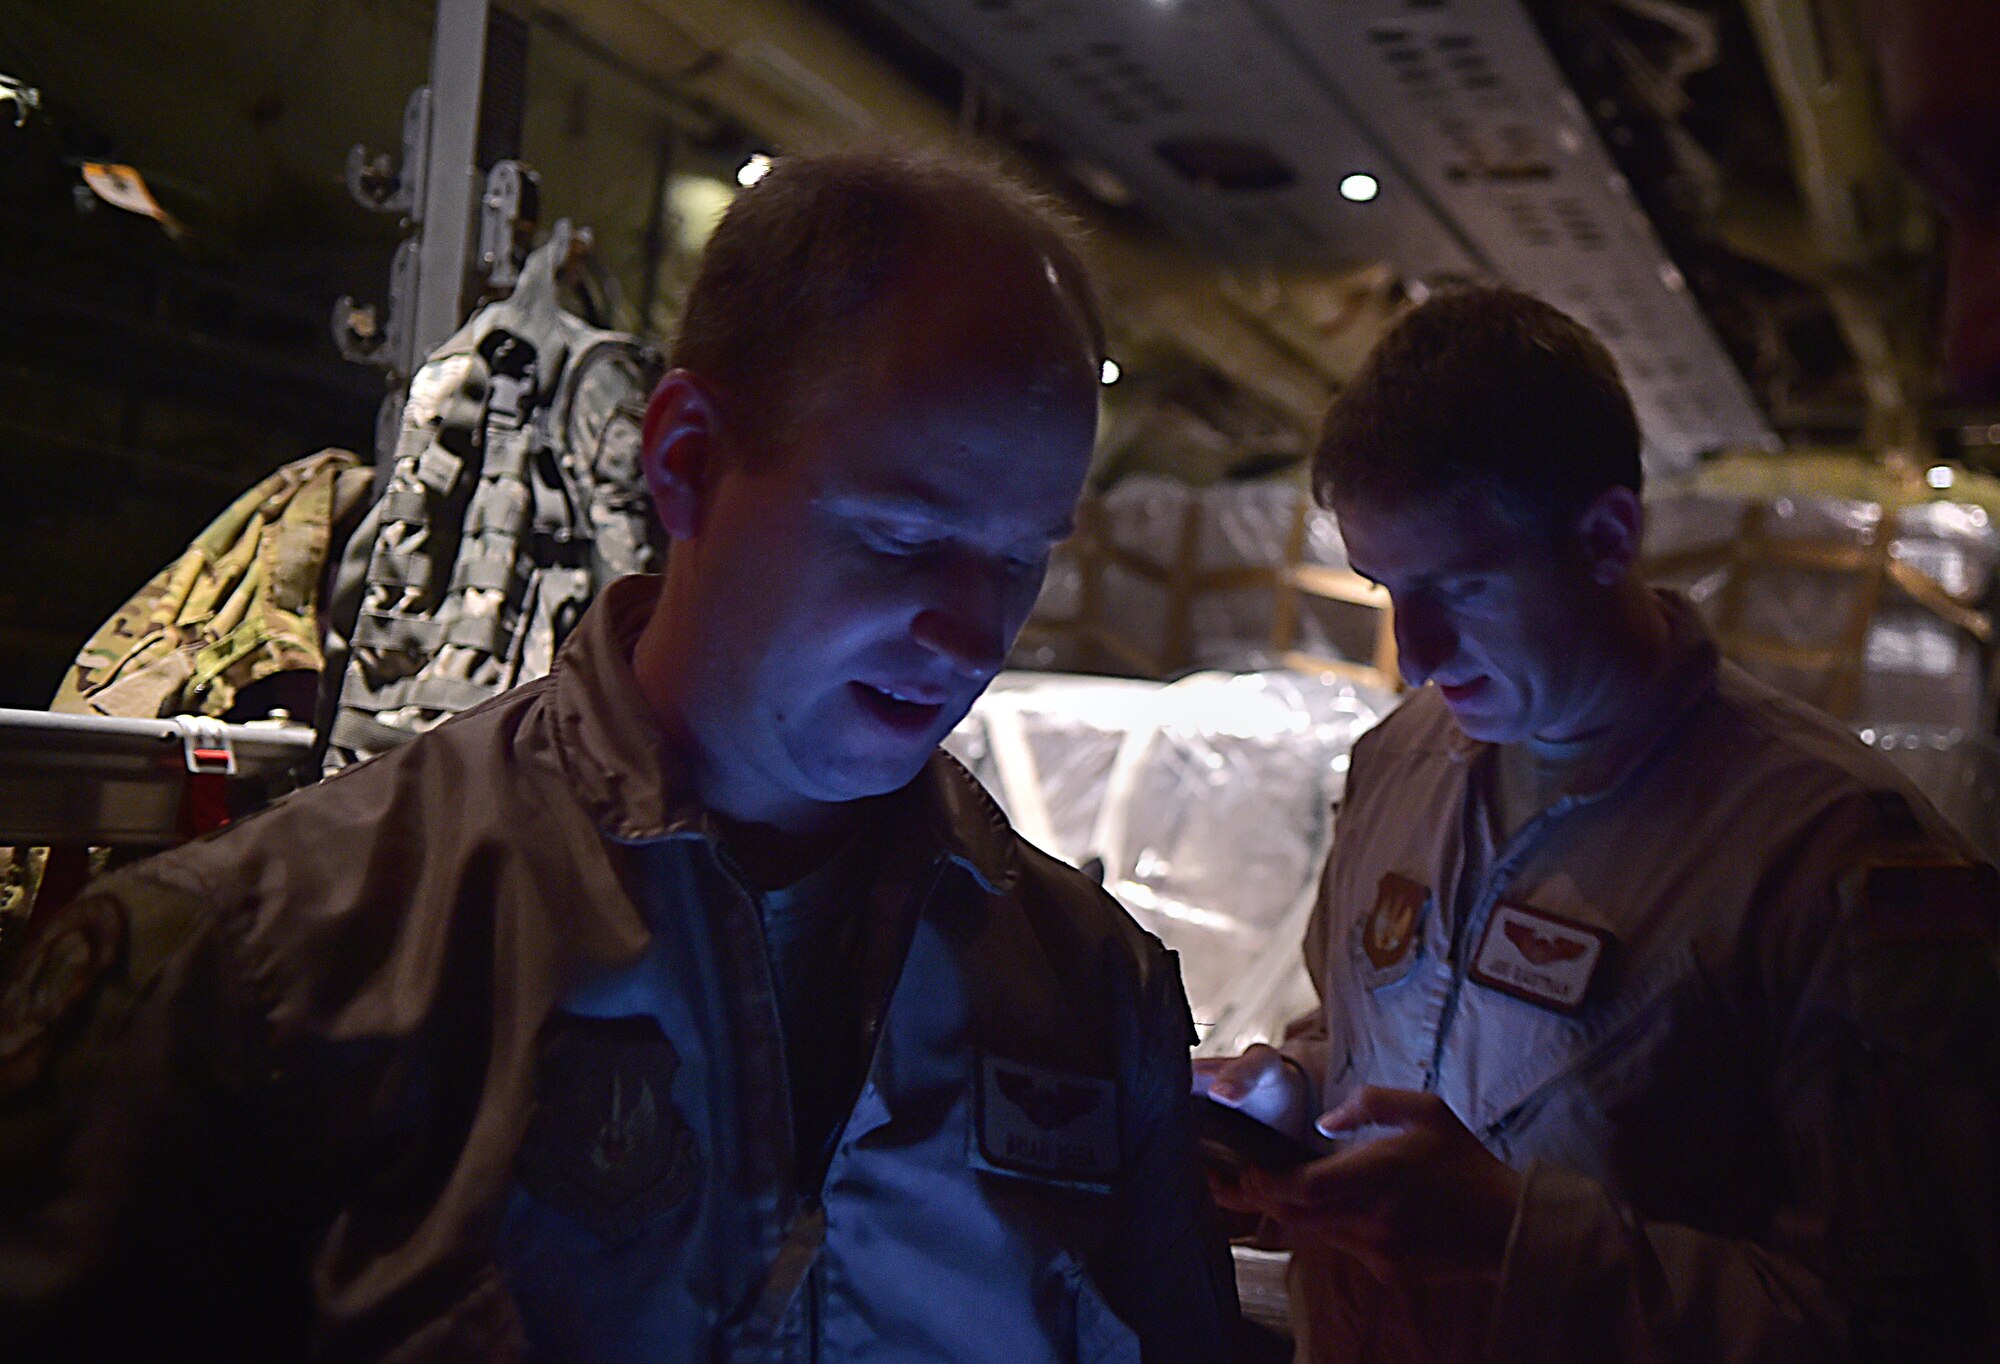 U.S. Air Force Capt. Brian Shea and Capt. Joe Eastman, pilots with the 37th Airlift Squadron prepare to fly the first mission from the 37th AS into Liberia, to assist with Operation UNITED ASSISTANCE Oct. 7, 2014, at Ramstein Air Base, Germany. As the Ebola outbreak becomes a potential global threat, U.S. Africa Command is working in support of the U.S. Agency for International Development, the lead federal agency (LFA), as part of a comprehensive U.S. Government effort to respond to and contain the outbreak of the Ebola virus in West Africa as quickly as possible.  This was the first C-130J Super Hercules flight launched from Ramstein to Monrovia, Liberia in support of OUA. (U.S. Air Force photo by/Staff Sgt. Sara Keller)